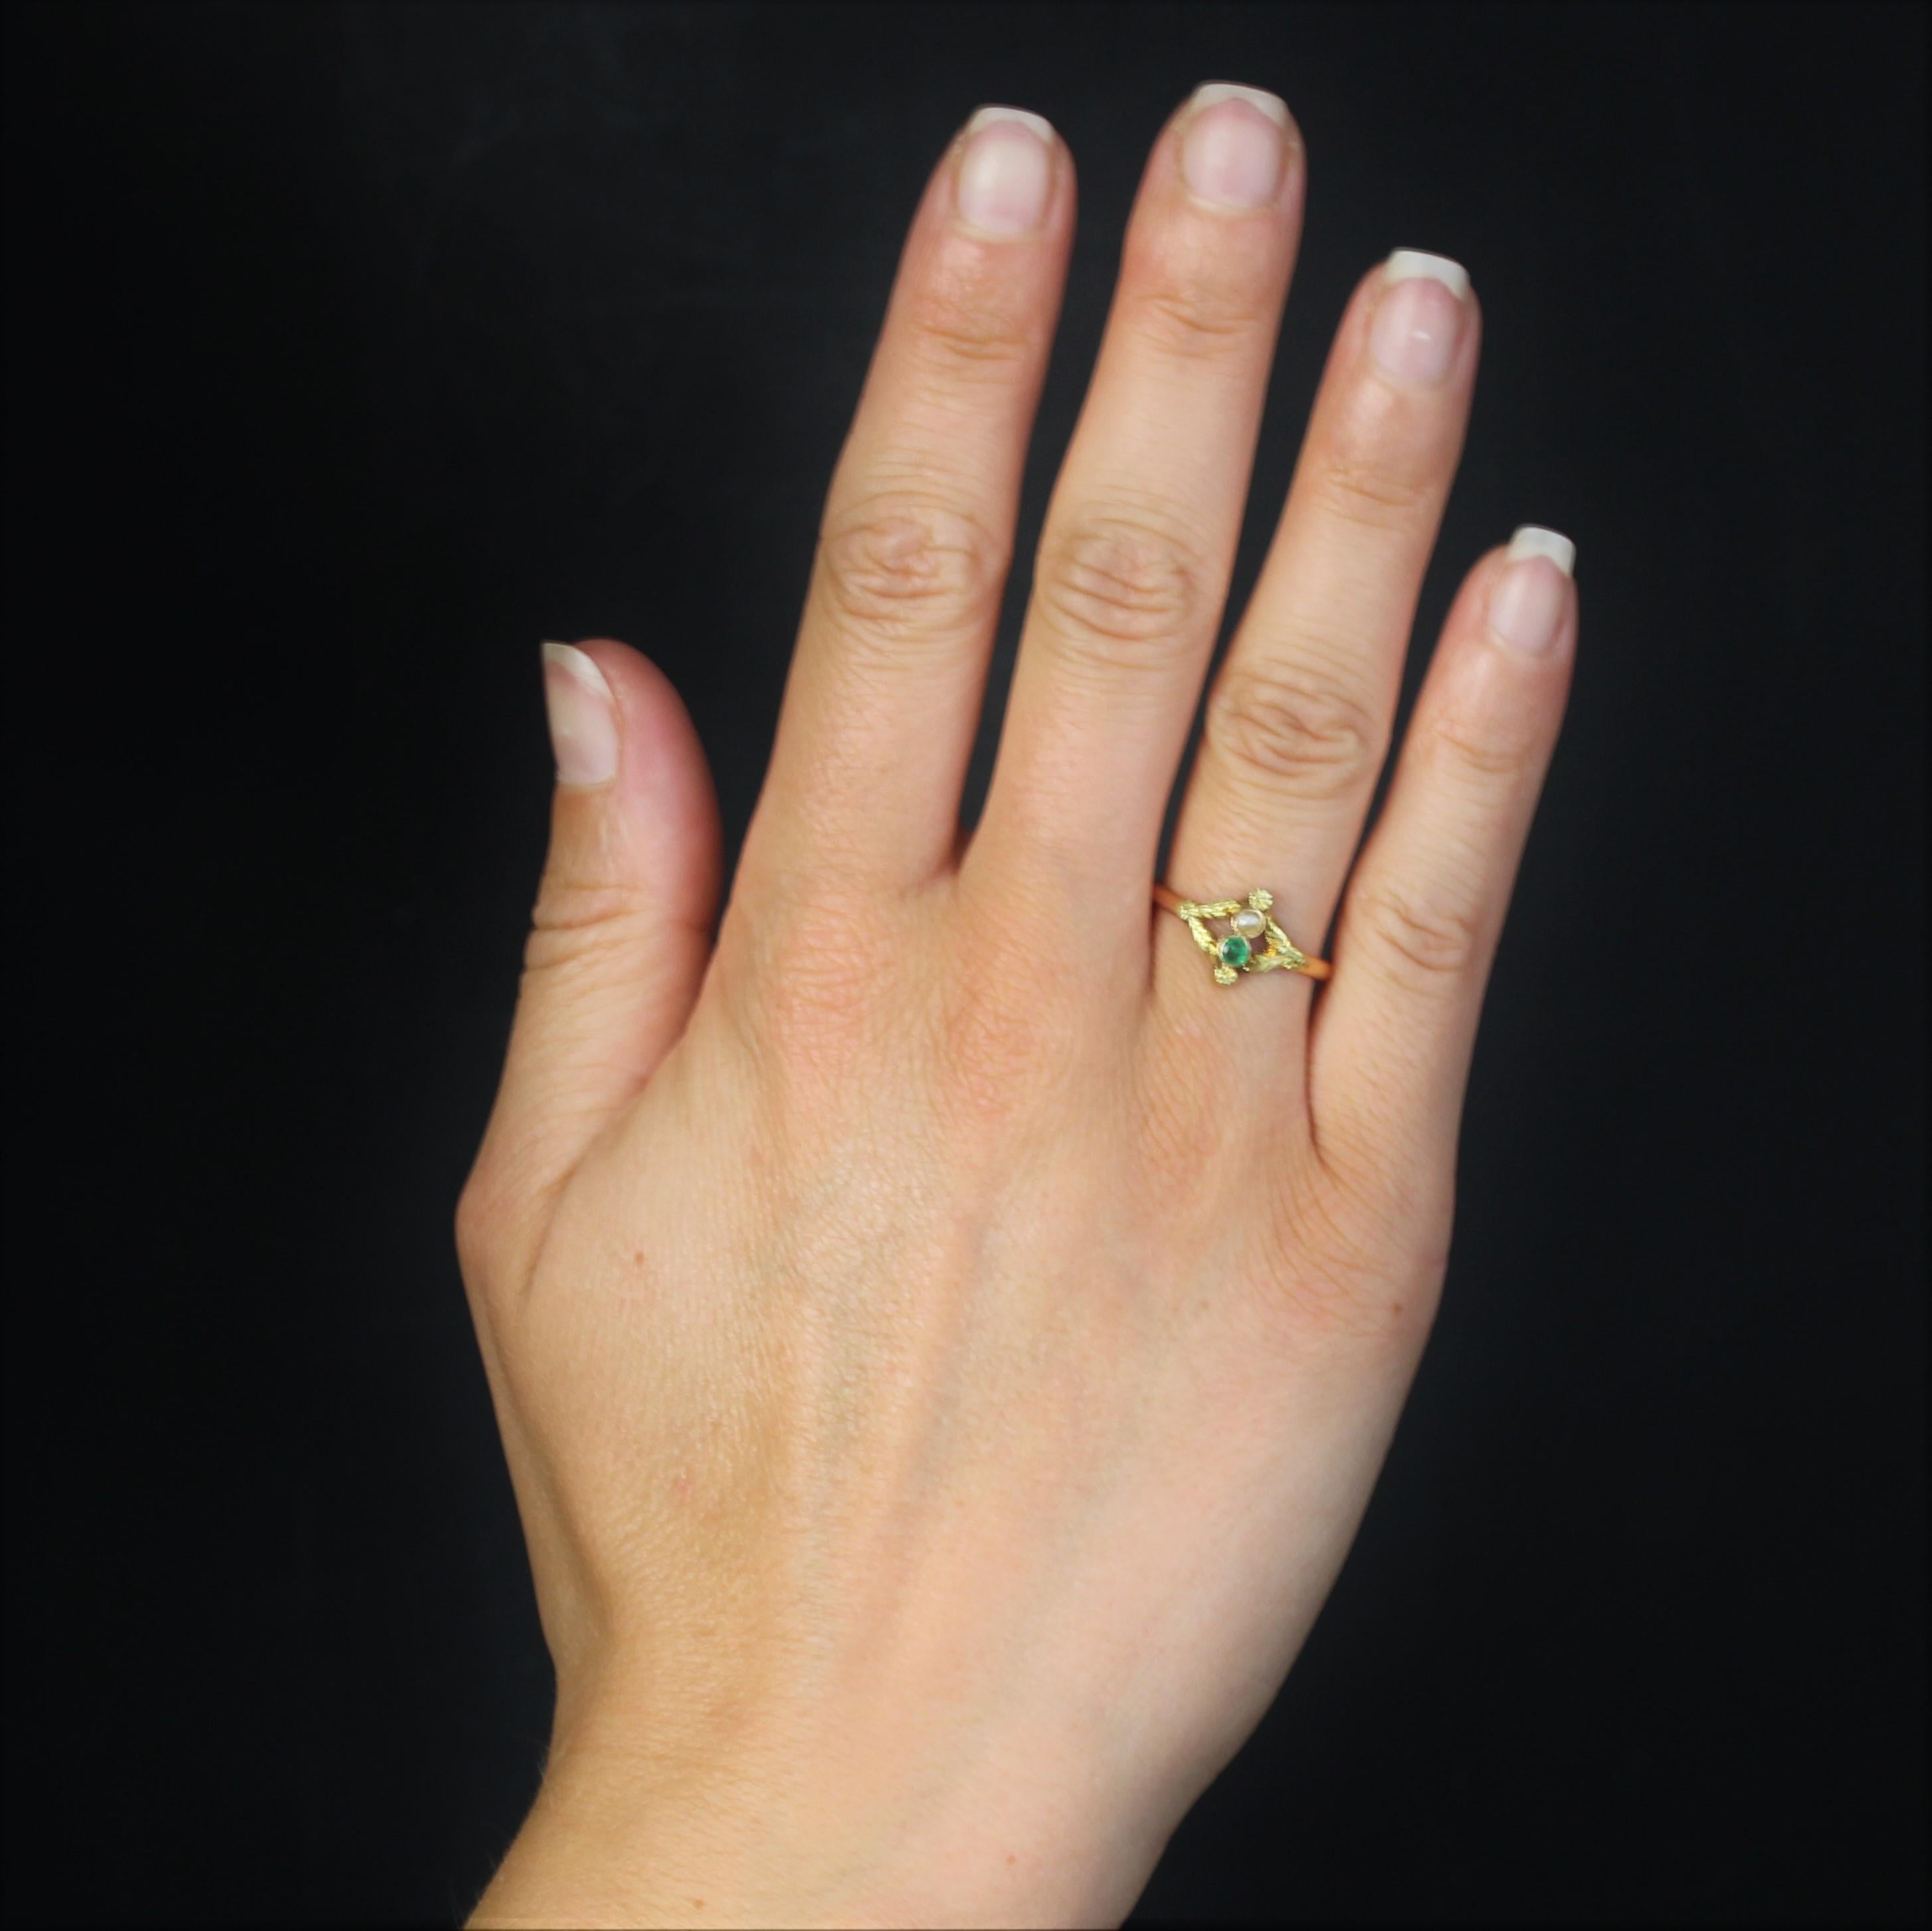 Ring in 18 karat rose and green gold, eagle head hallmark.
A delightful antique You and Me ring in rose gold, with its closed-set top adorned with a fine half-pearl and a round emerald decorated on either side with a chased flower in green gold.